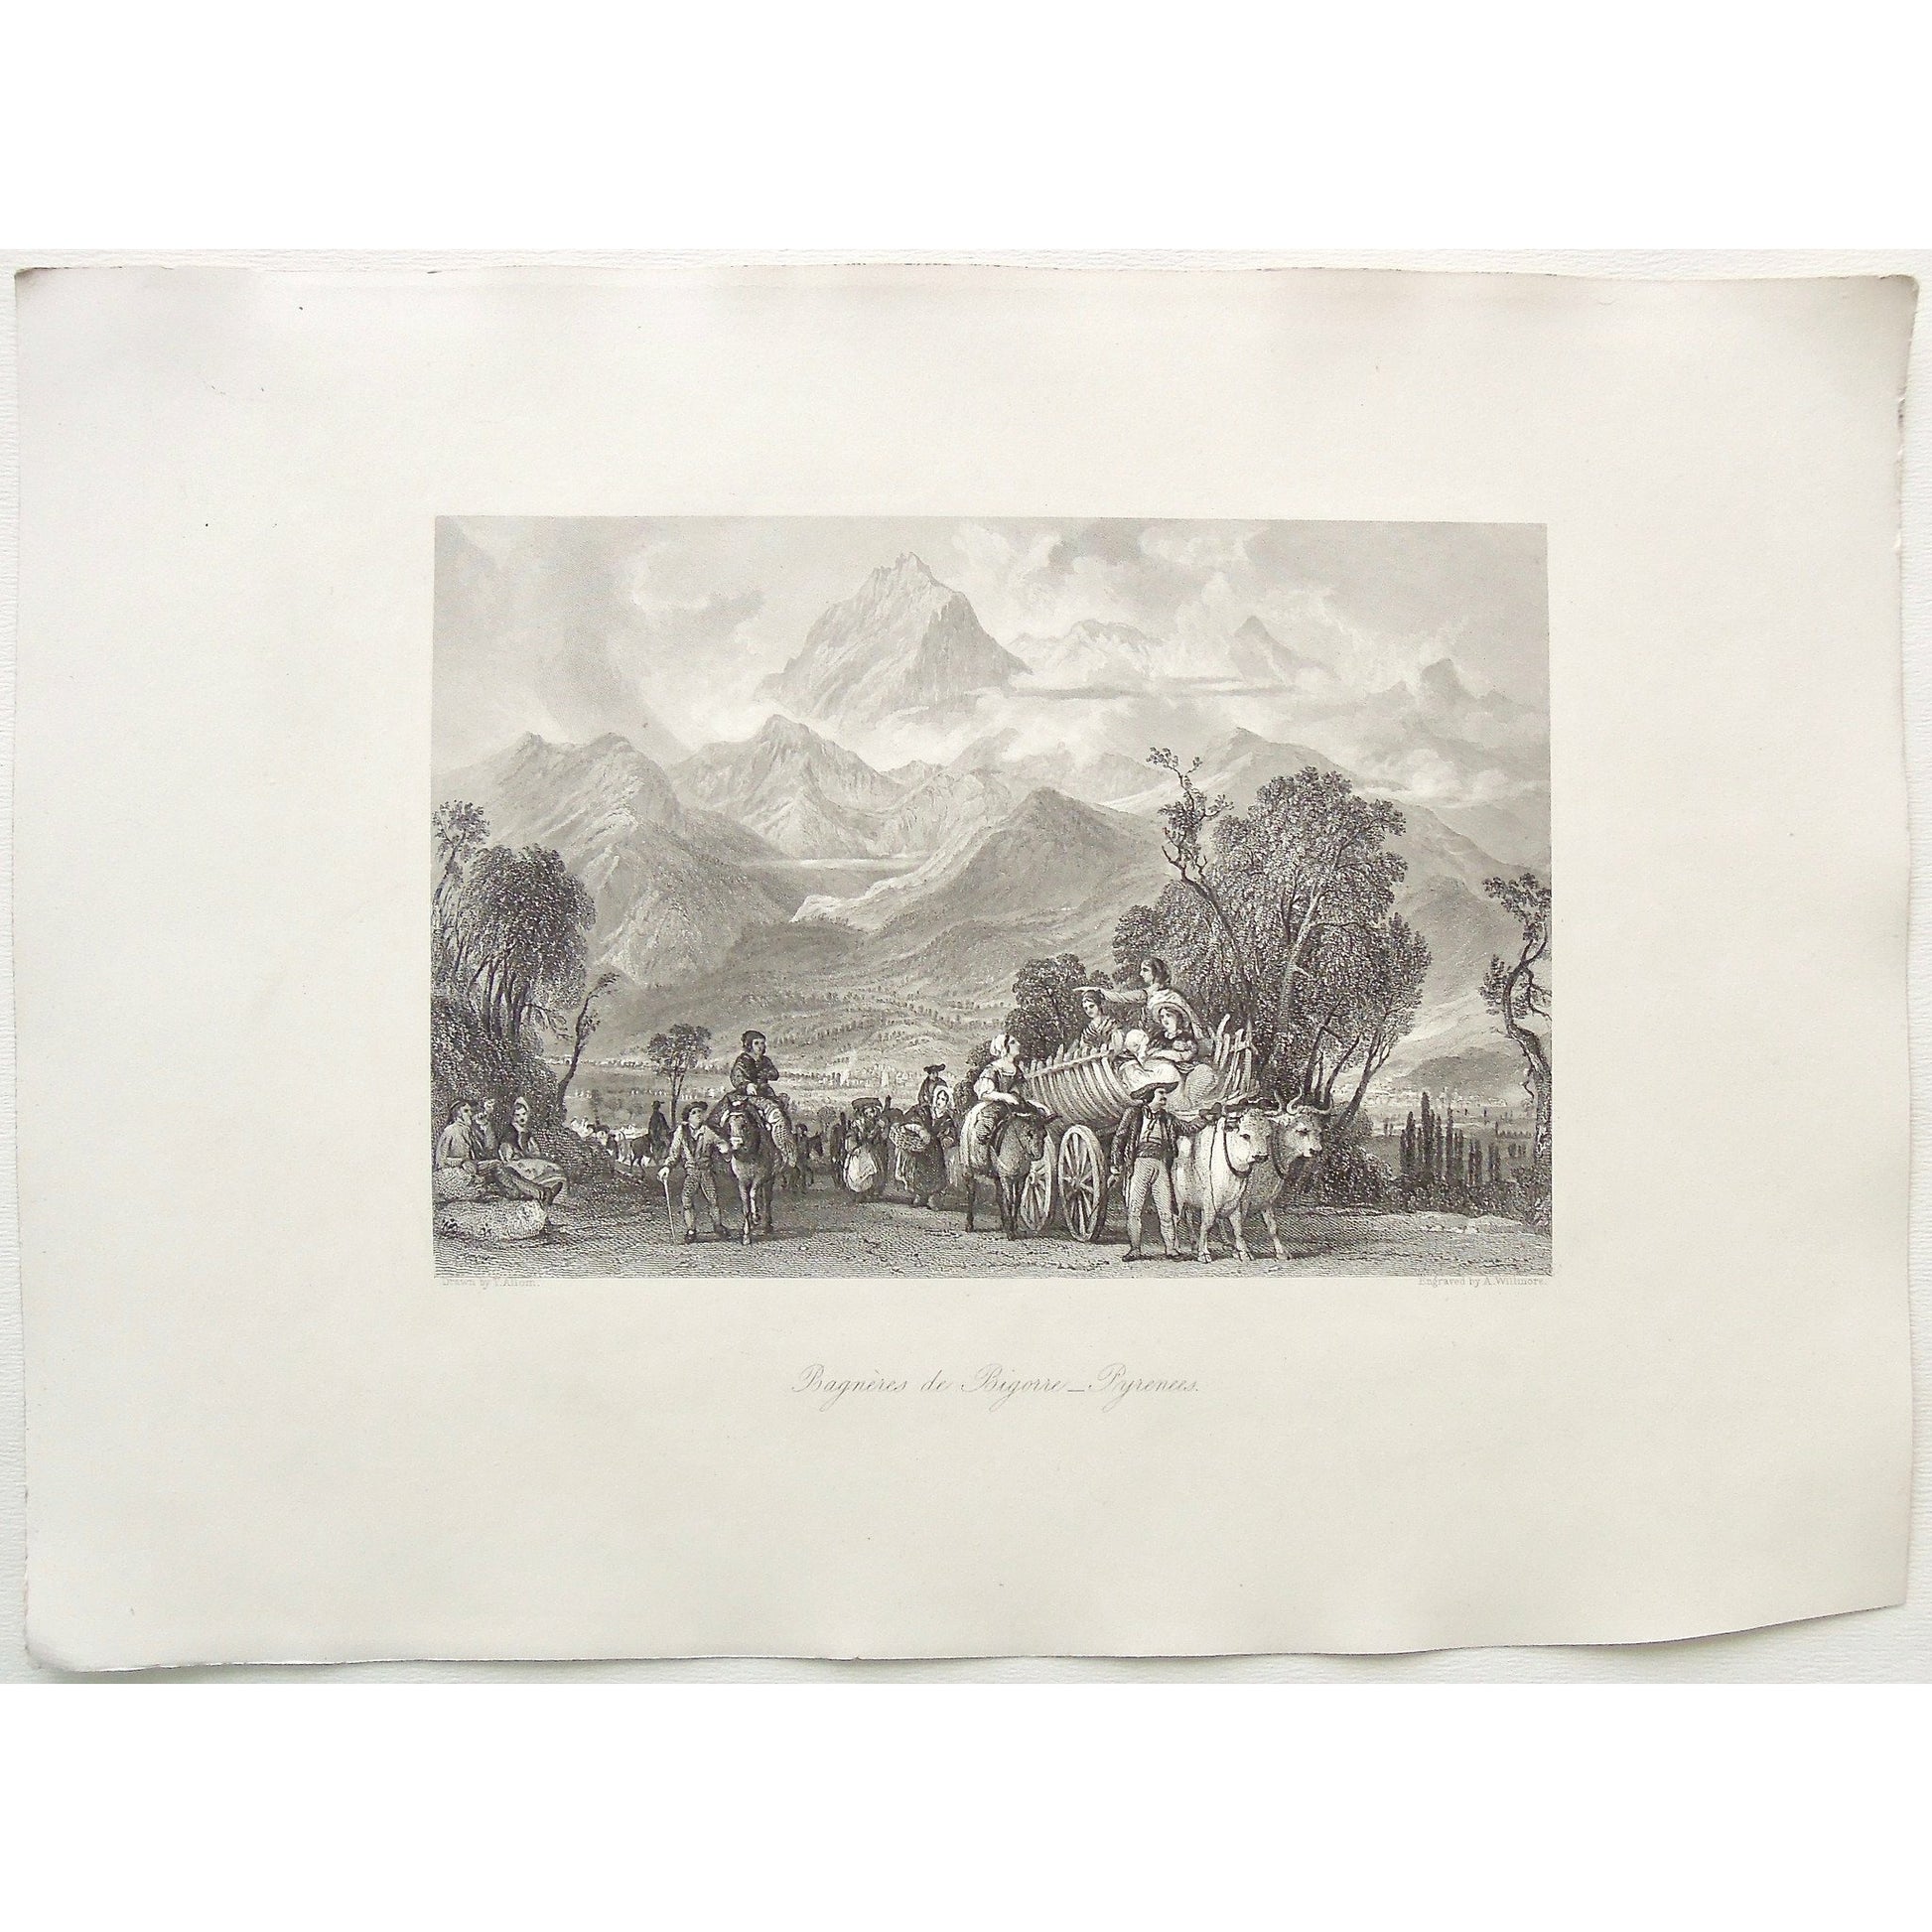 Bagnères de Bigorre, Bagnères, Bigorre, Pyrenees, Hautes-Pyrénées, France, Occitanie, Southwestern France, Ox and Carriage, Ox drawn carriage, Horses, Horseback riding, riding, road, travellers, Mountains, Mountain Range, Pyrenees Mountains, convoy, Allom, Thomas Allom, T. Allom, A. Willmore, Willmore, Steel engraving, Europe Illustrated, London Printing and Publishing Company, London, 1876-79, 1876, 1879, Sherer, John Sherer, Antique Print, Antique, Prints, Vintage, Vintage Art, Vintage Prints, Art, Wa